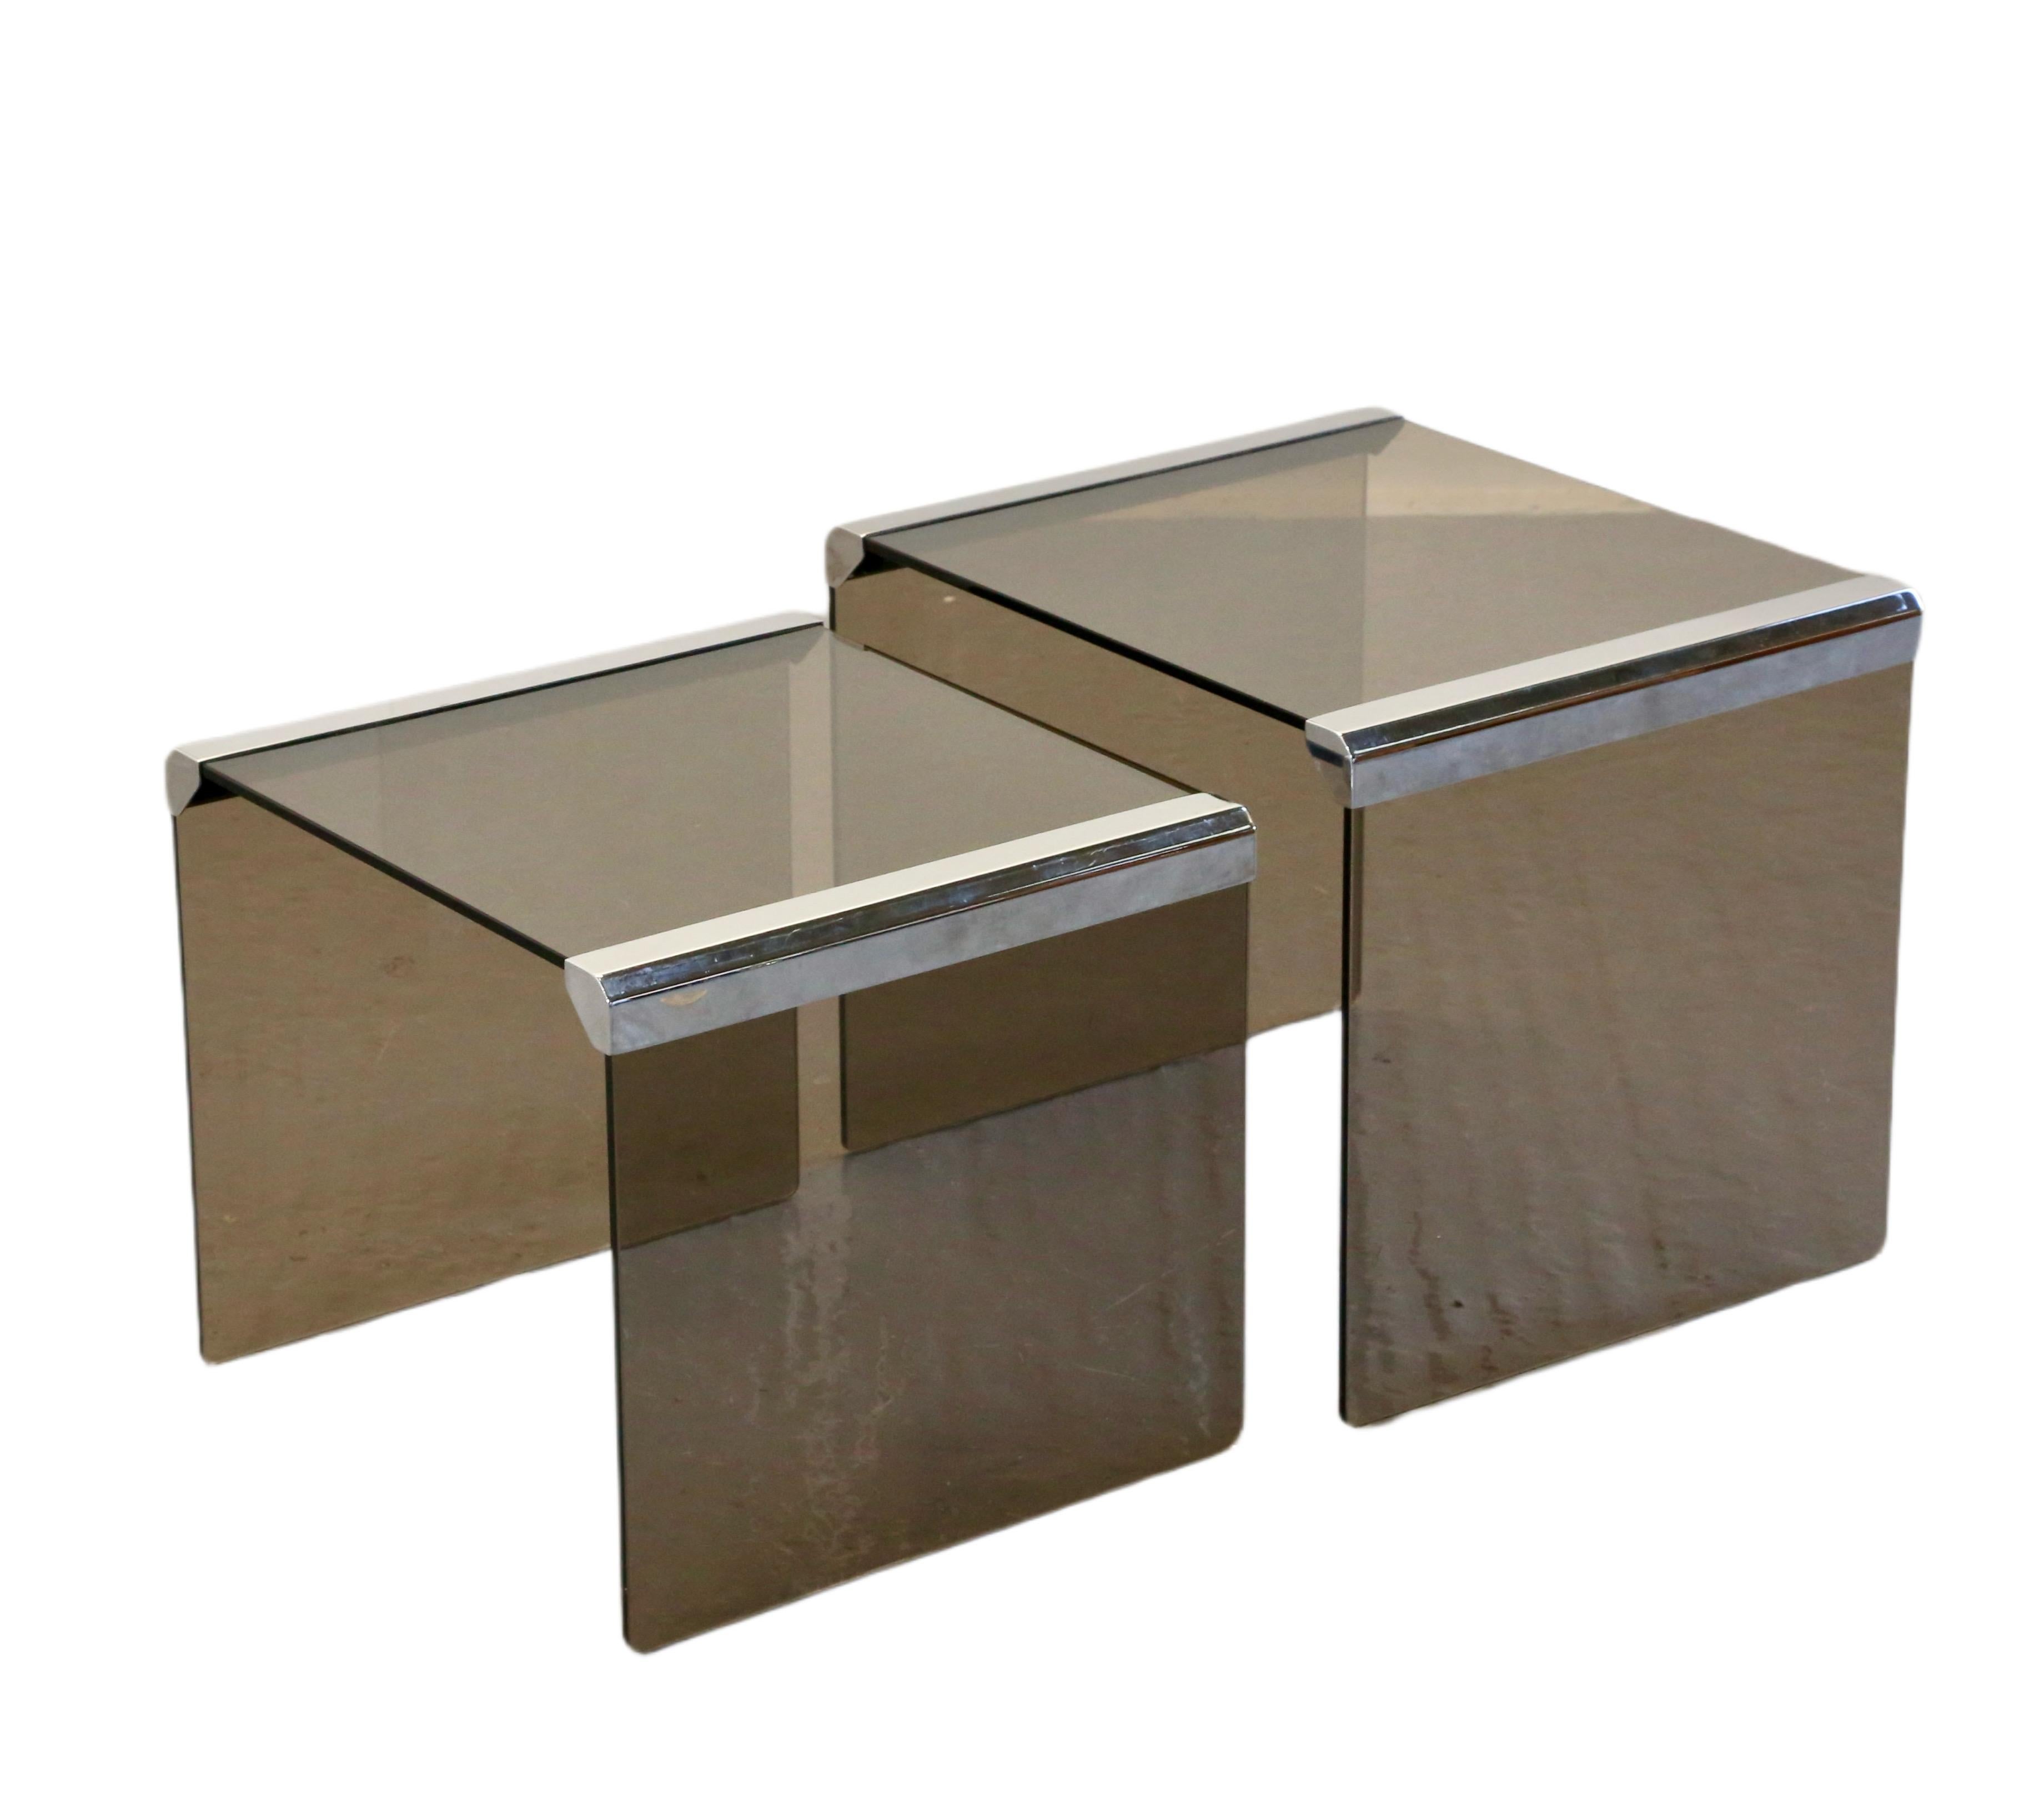 A fabulous set of Italian Mid Century Modern nesting tables, designed by Pierangelo Gallotti, possibly in collaboration with Luigi Massoni, for Gallotti&Radice. The tables feature high quality smoked and toughened glass with chromed steel edges.